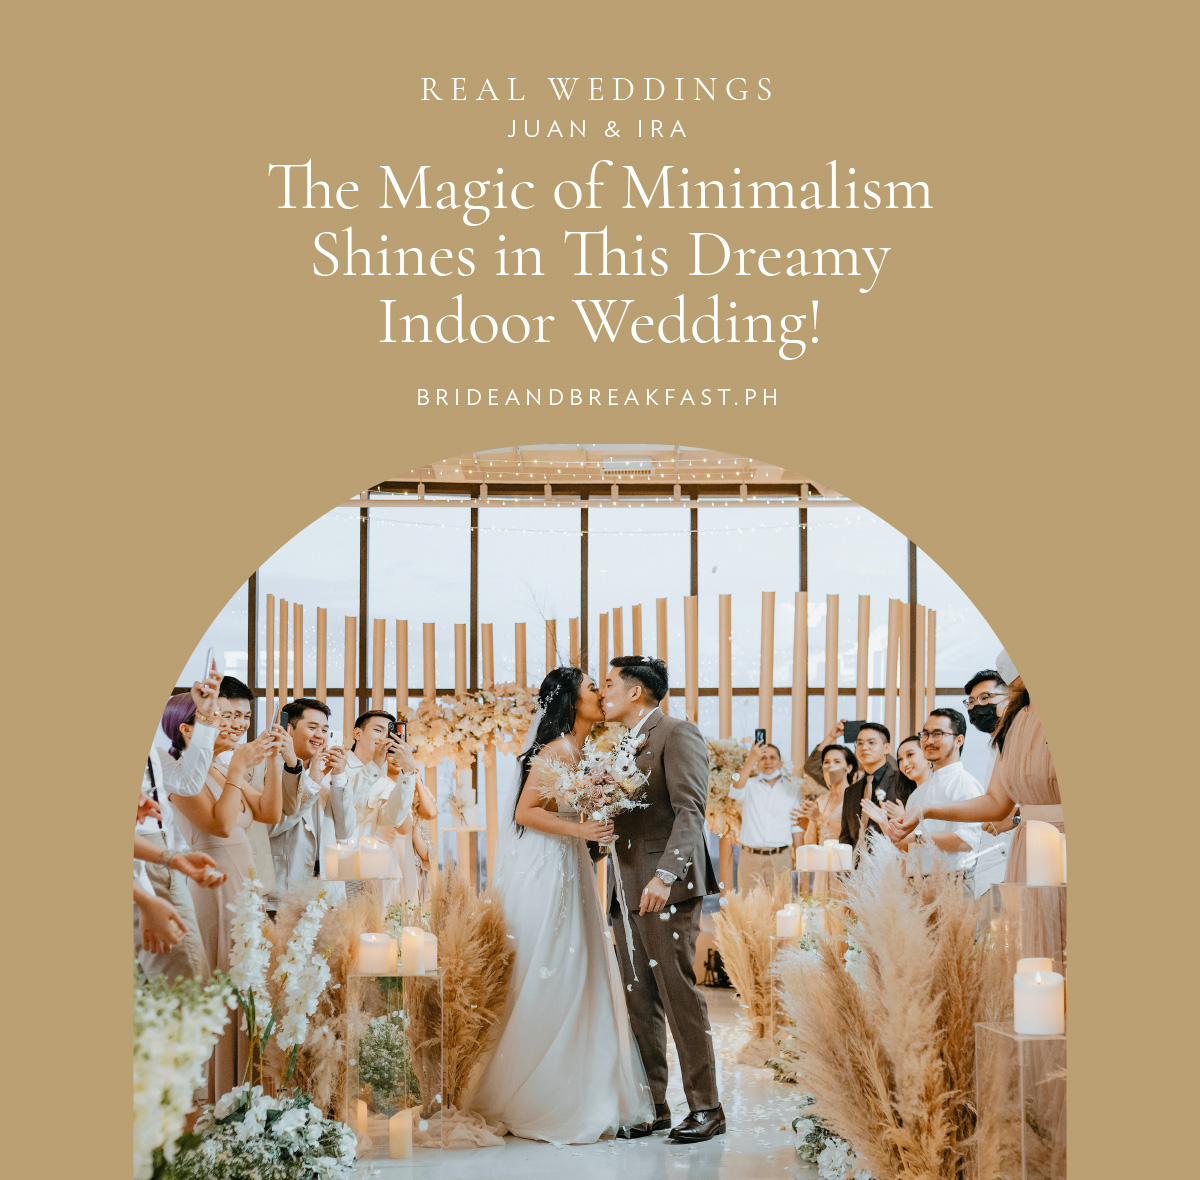 The Magic of Minimalism Shines in This Dreamy Indoor Wedding!